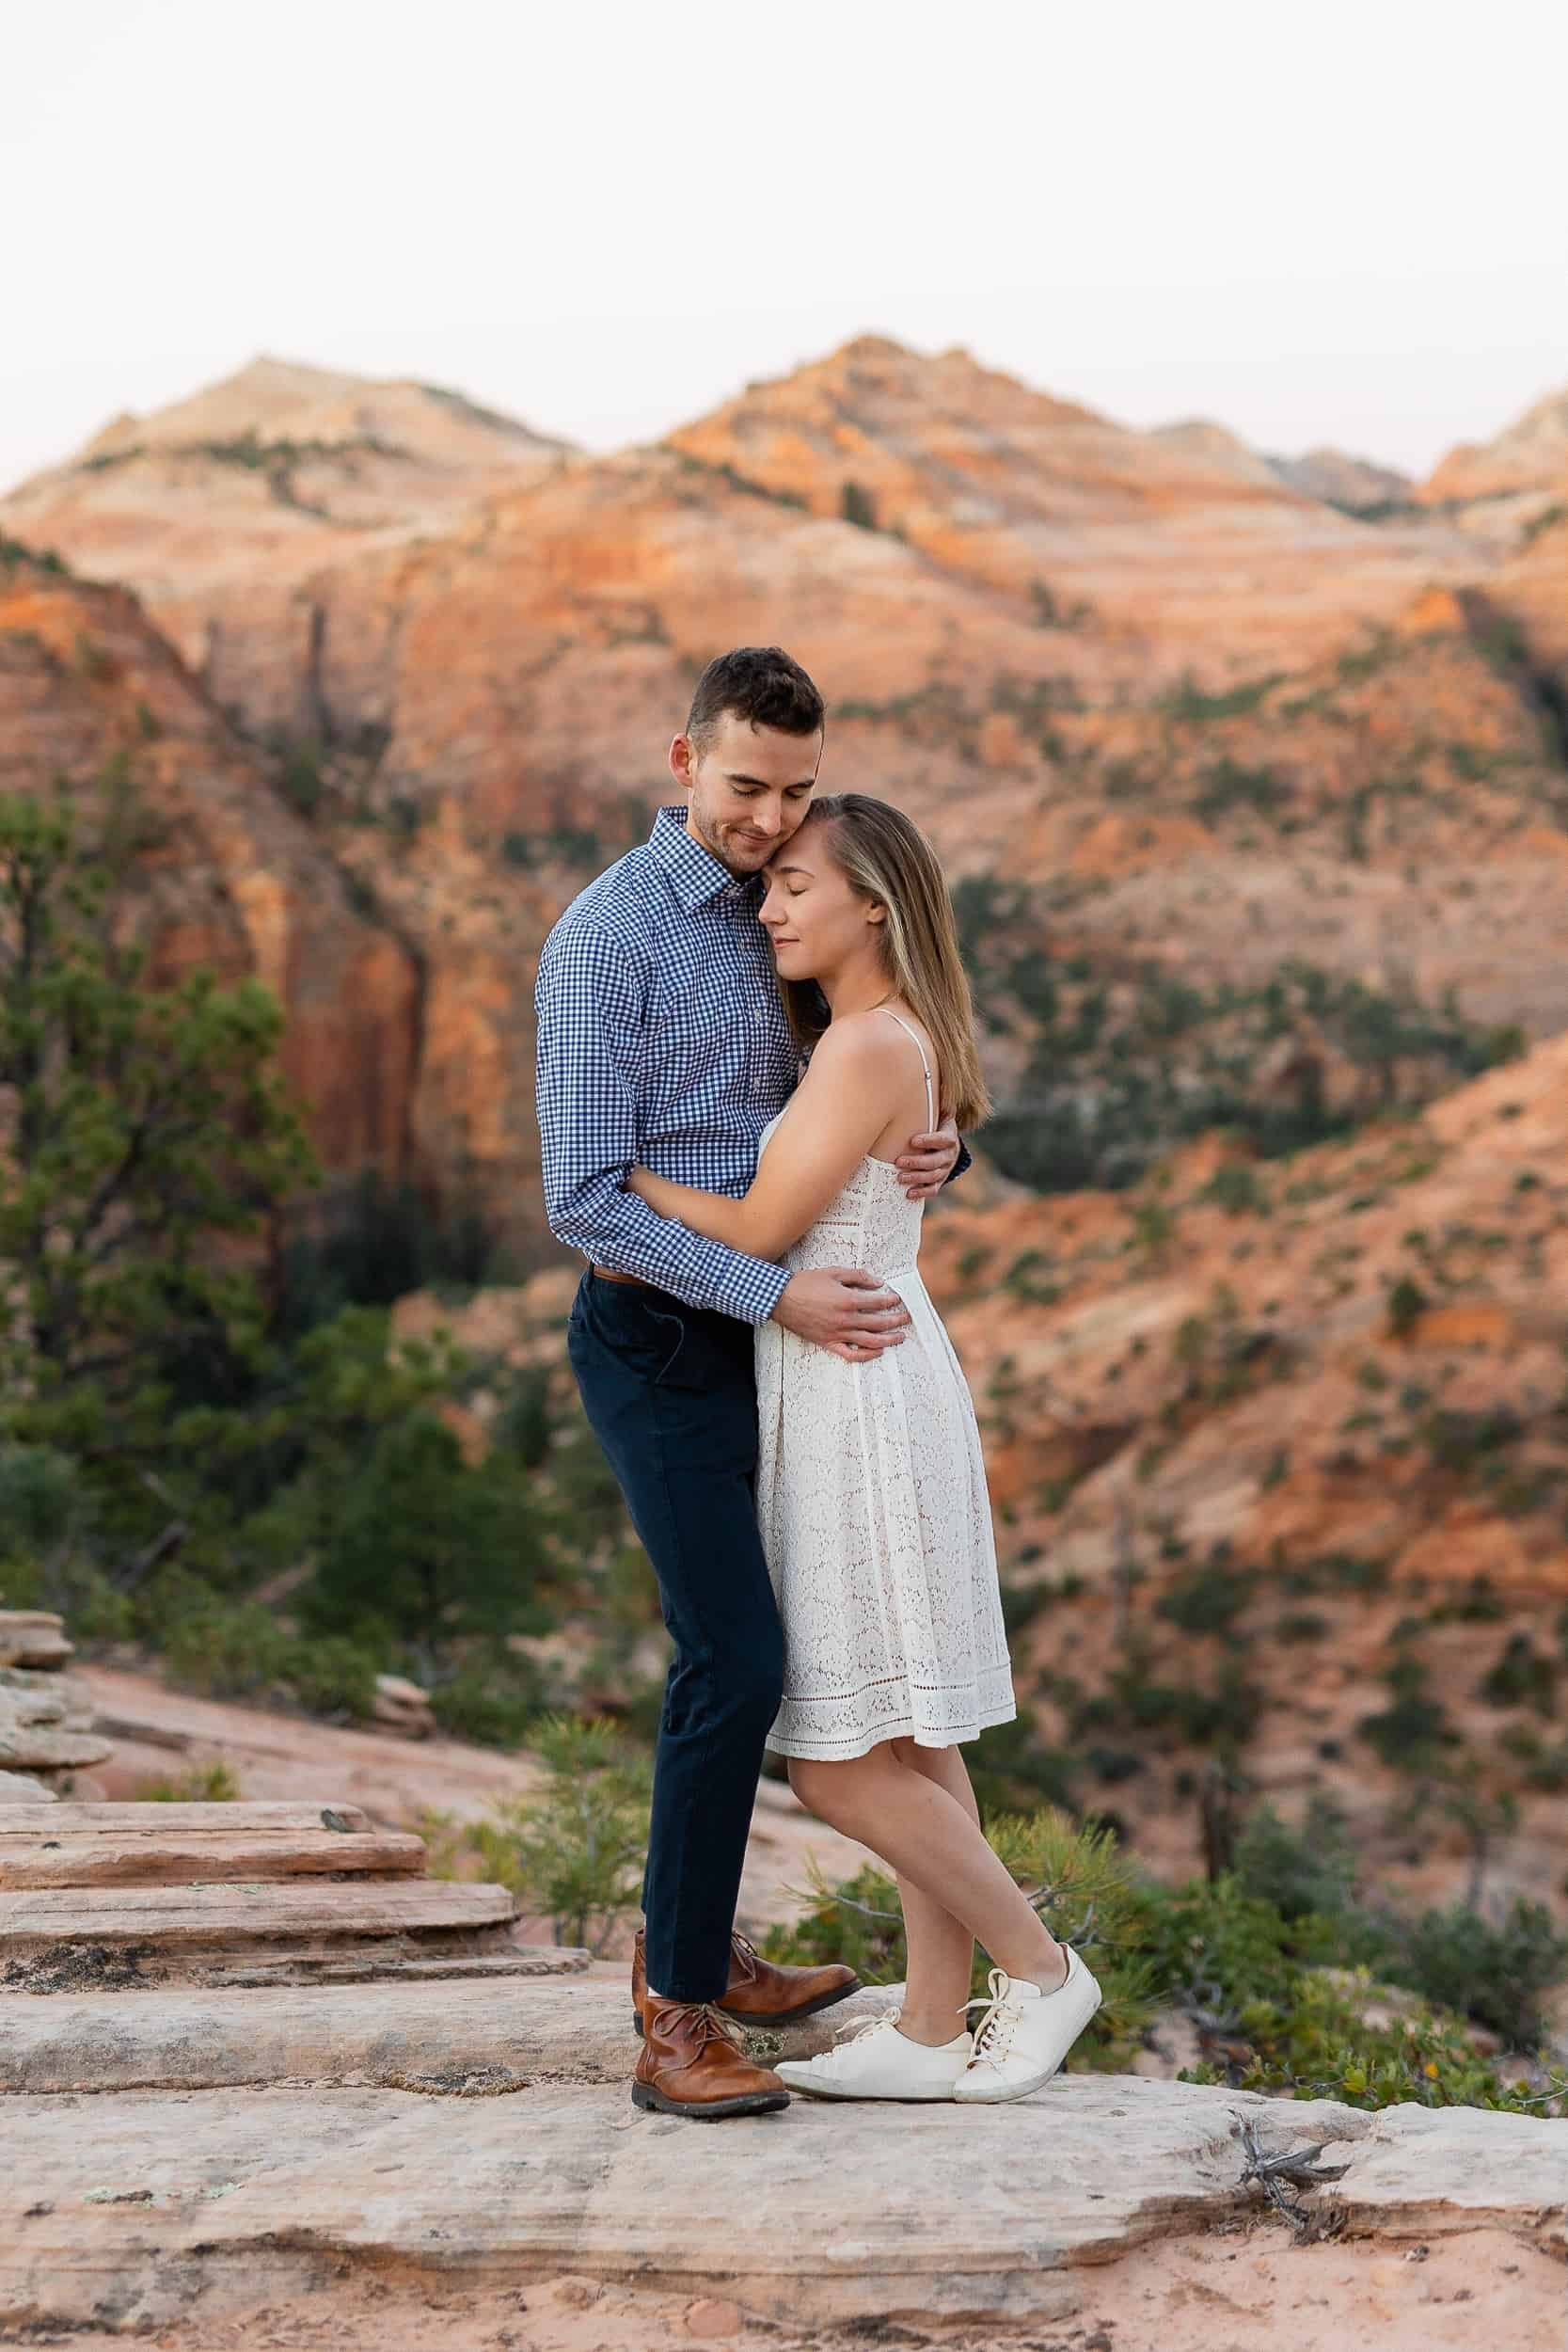 Couple hold each other close during their engagement photoshoot in Zion National Park